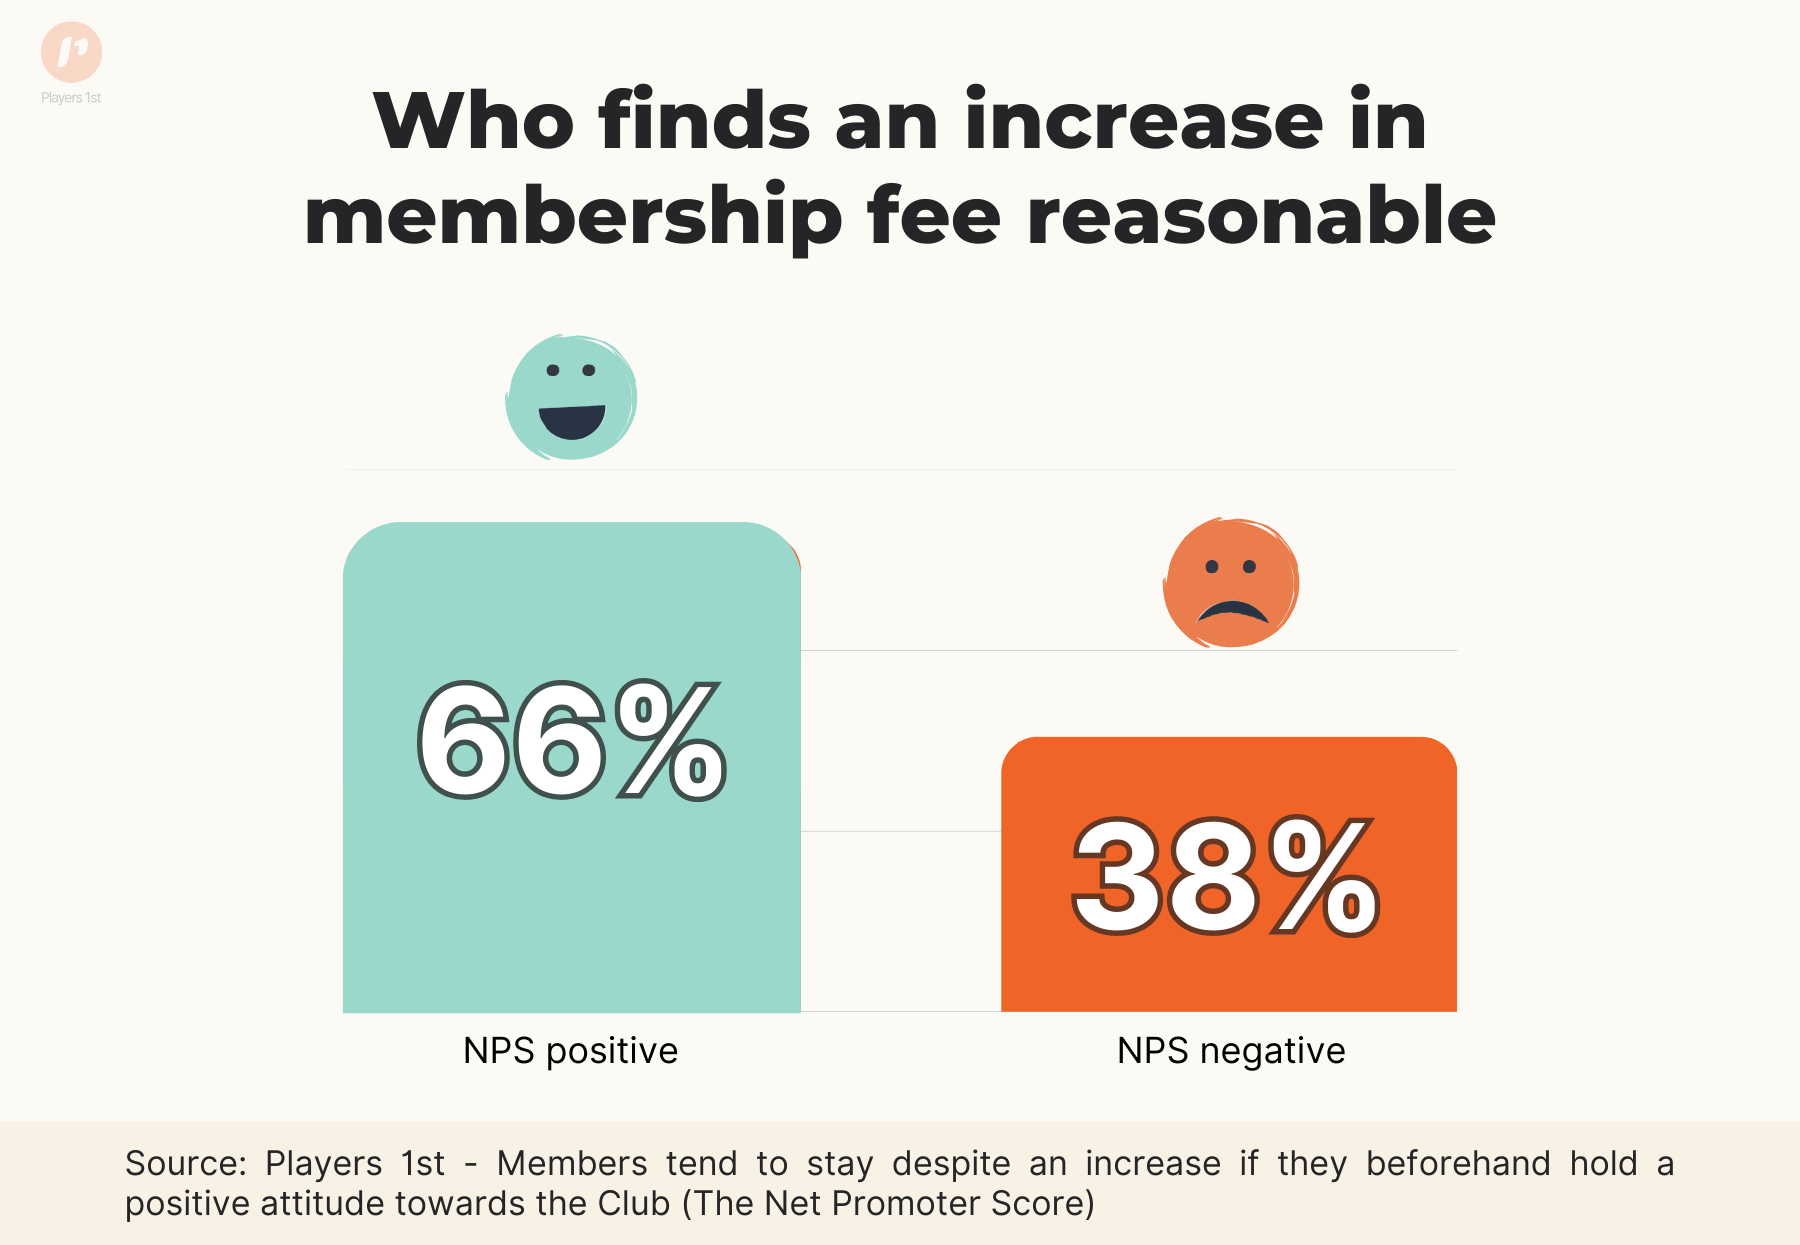 Positive Net Promoter Score and Negative Net Promoter Score. Who finds an increase in membership fee reasonable?